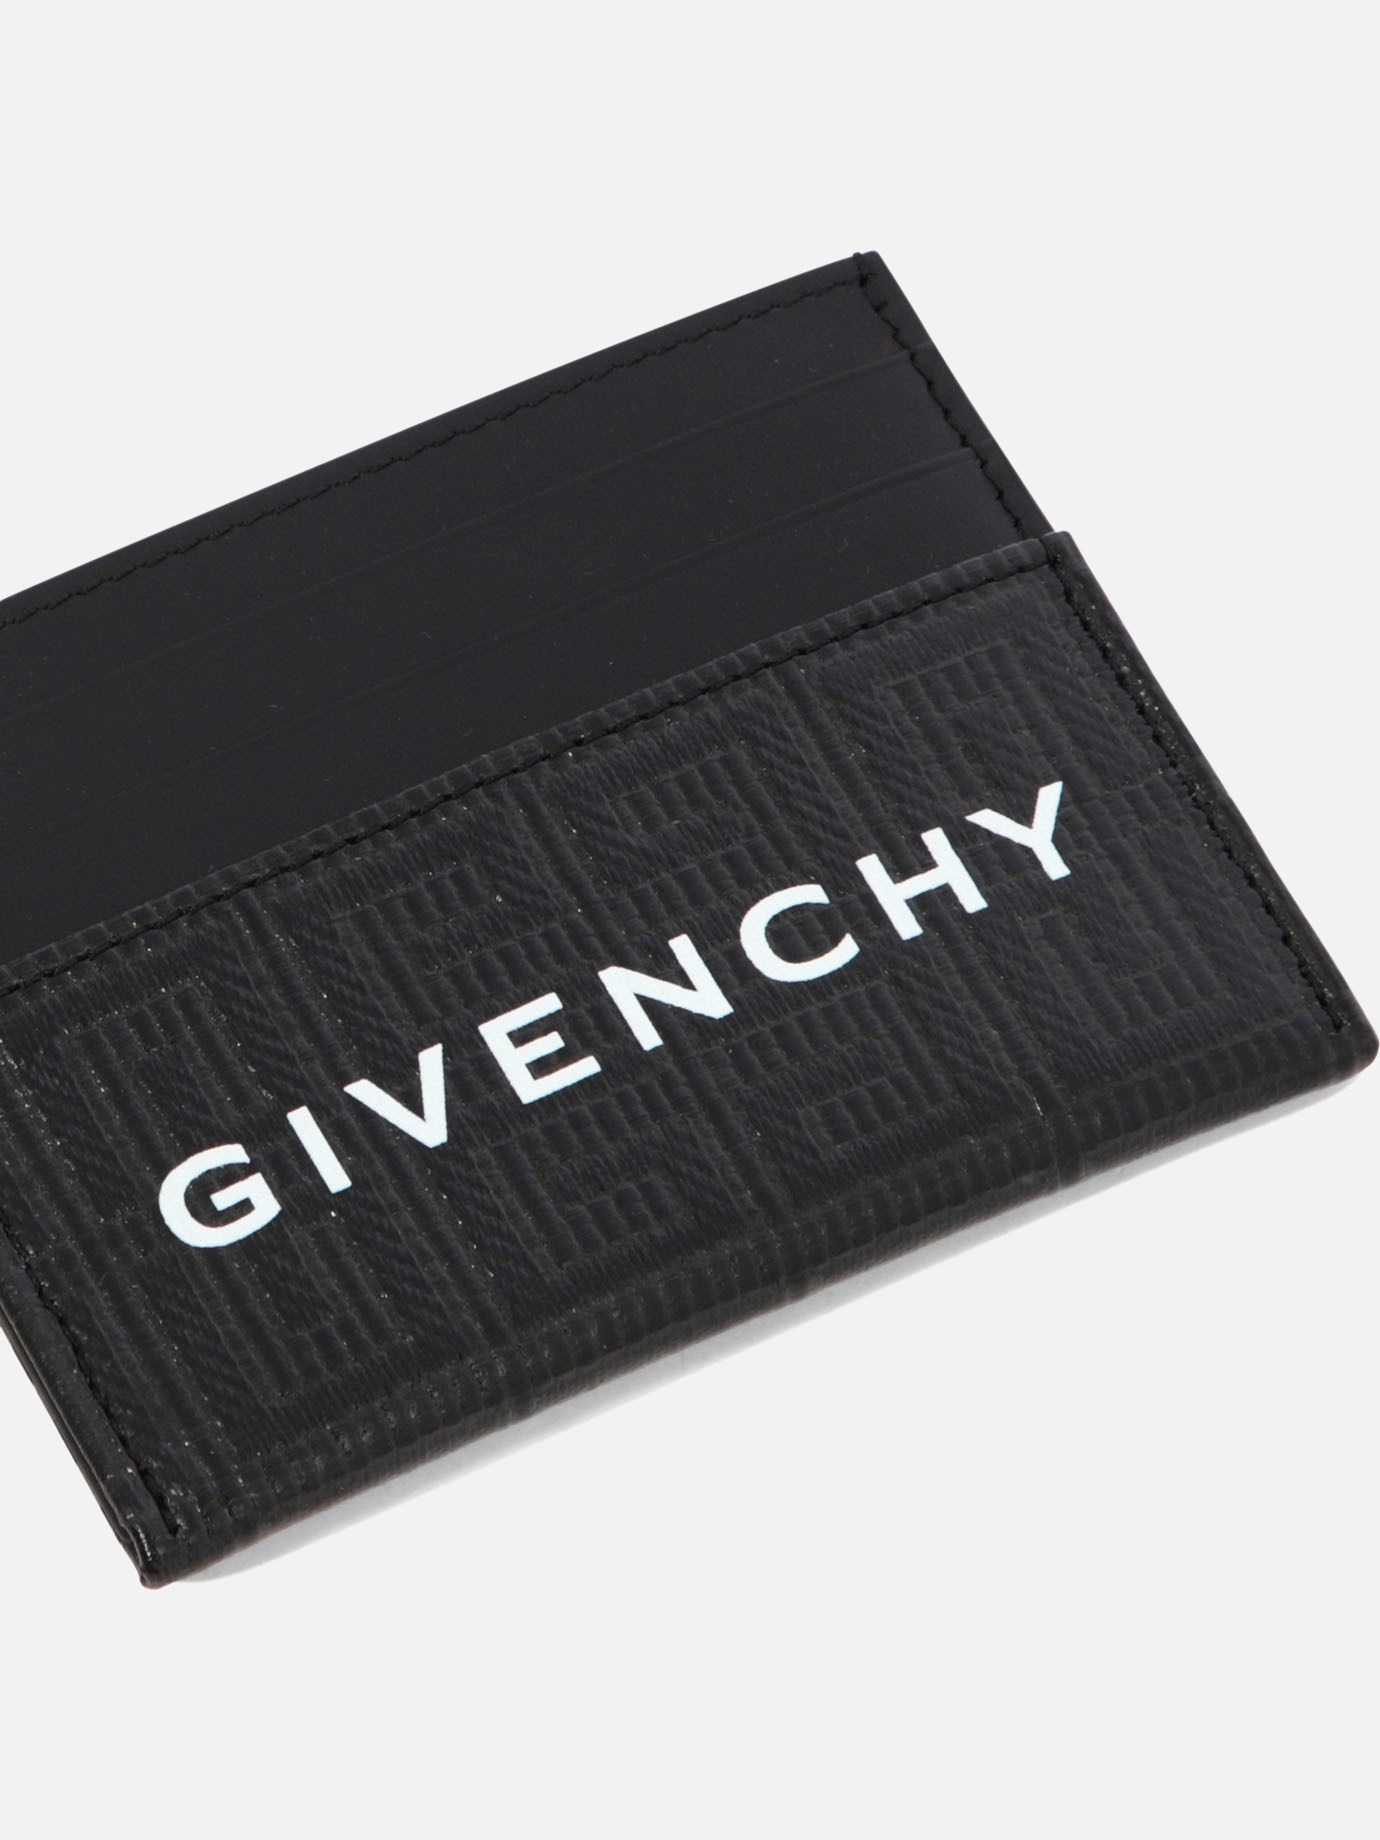 Portacarte  4G  by Givenchy